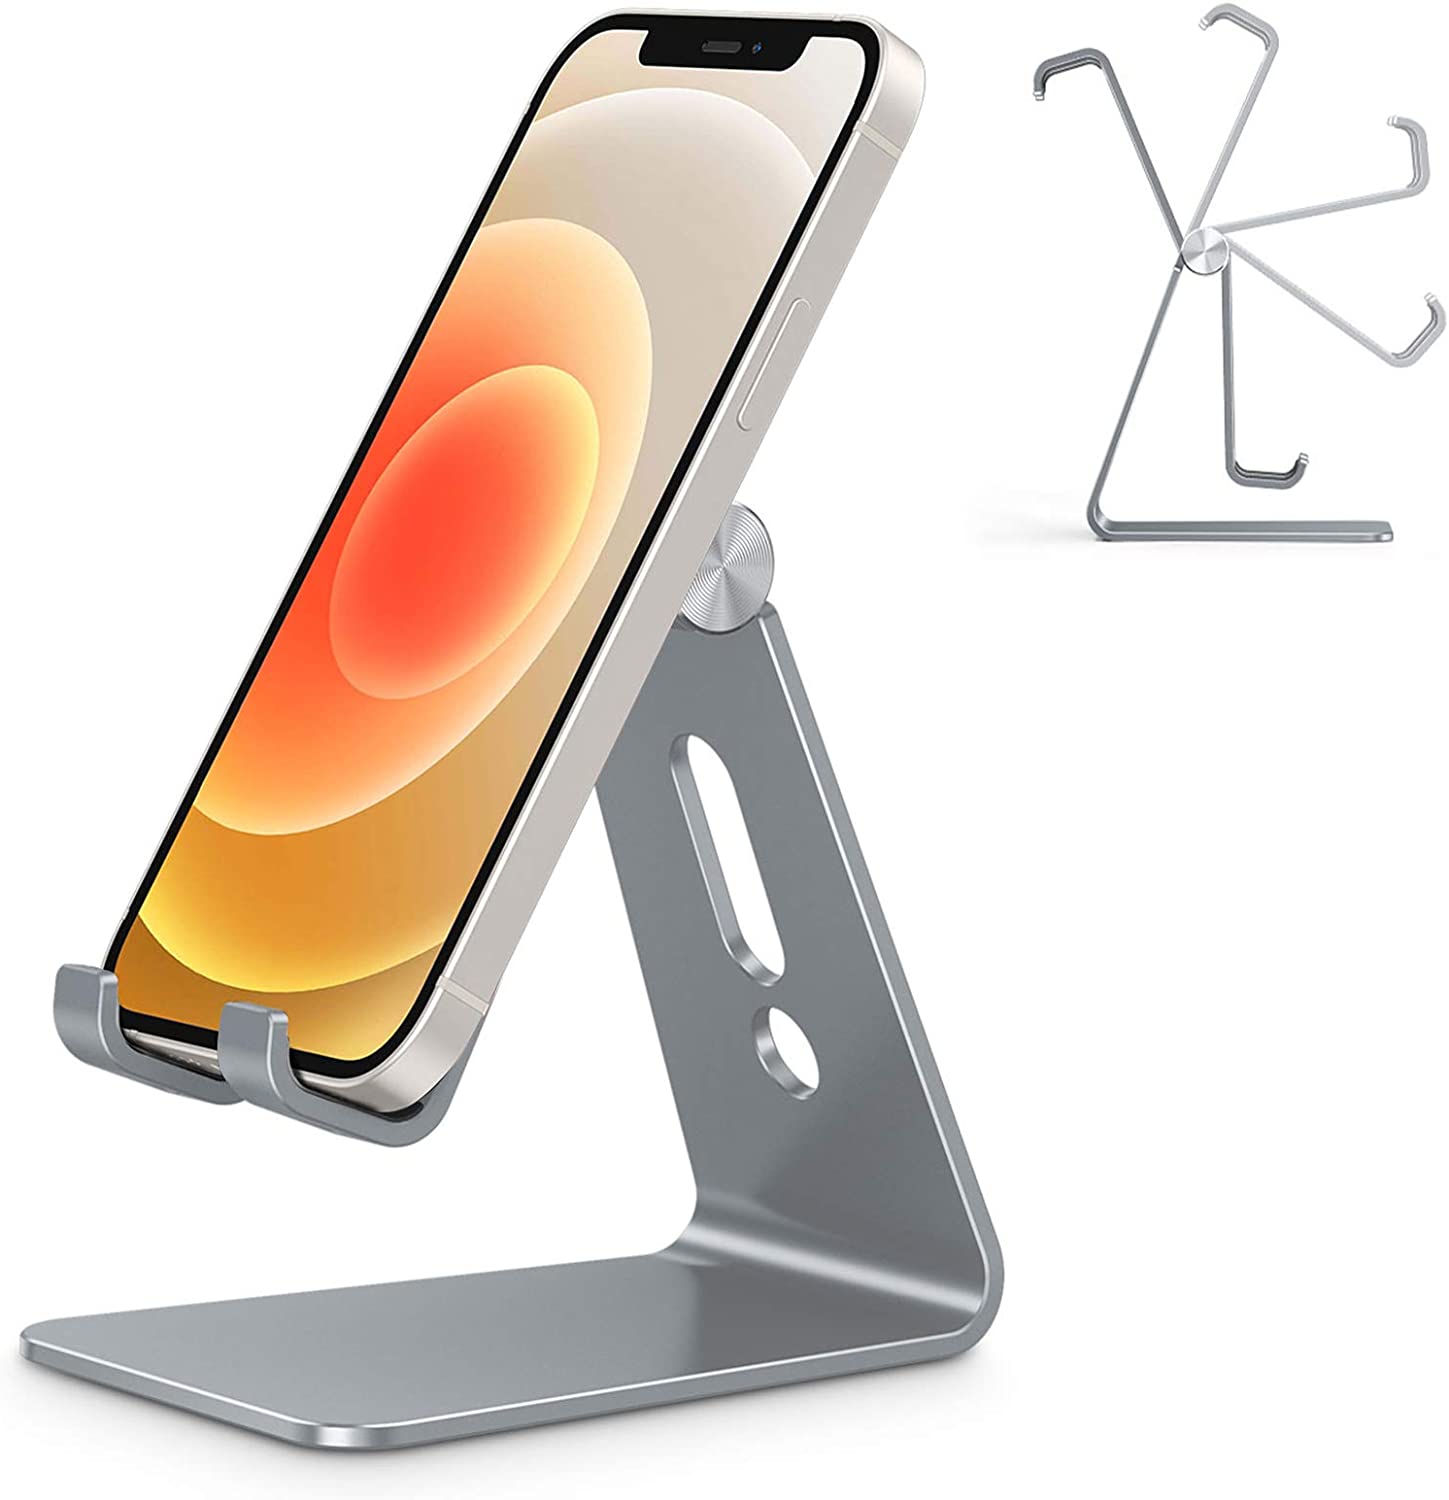 BestPu Adjustable Cell Phone Stand, Aluminum Desktop Phone Holder Dock Compatible with iPhone 11 Pro Max Xs XR 8 Plus 7 6, Samsung Galaxy, Google Pixel, Android Phones, Silver